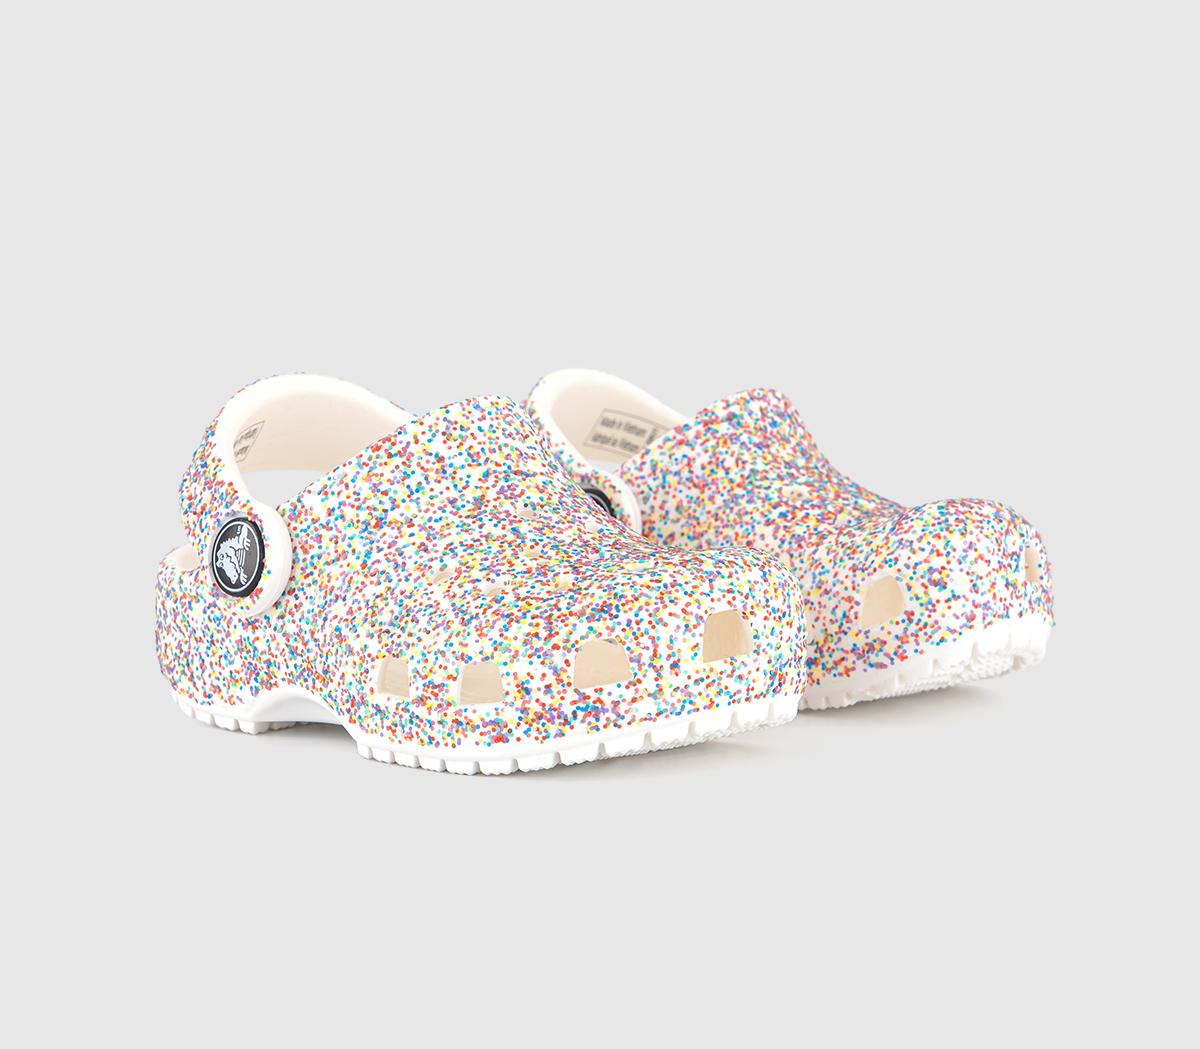 Crocs Kids Classic Toddler Clogs Sprinkle Multi White/Red/Blue, 4infant